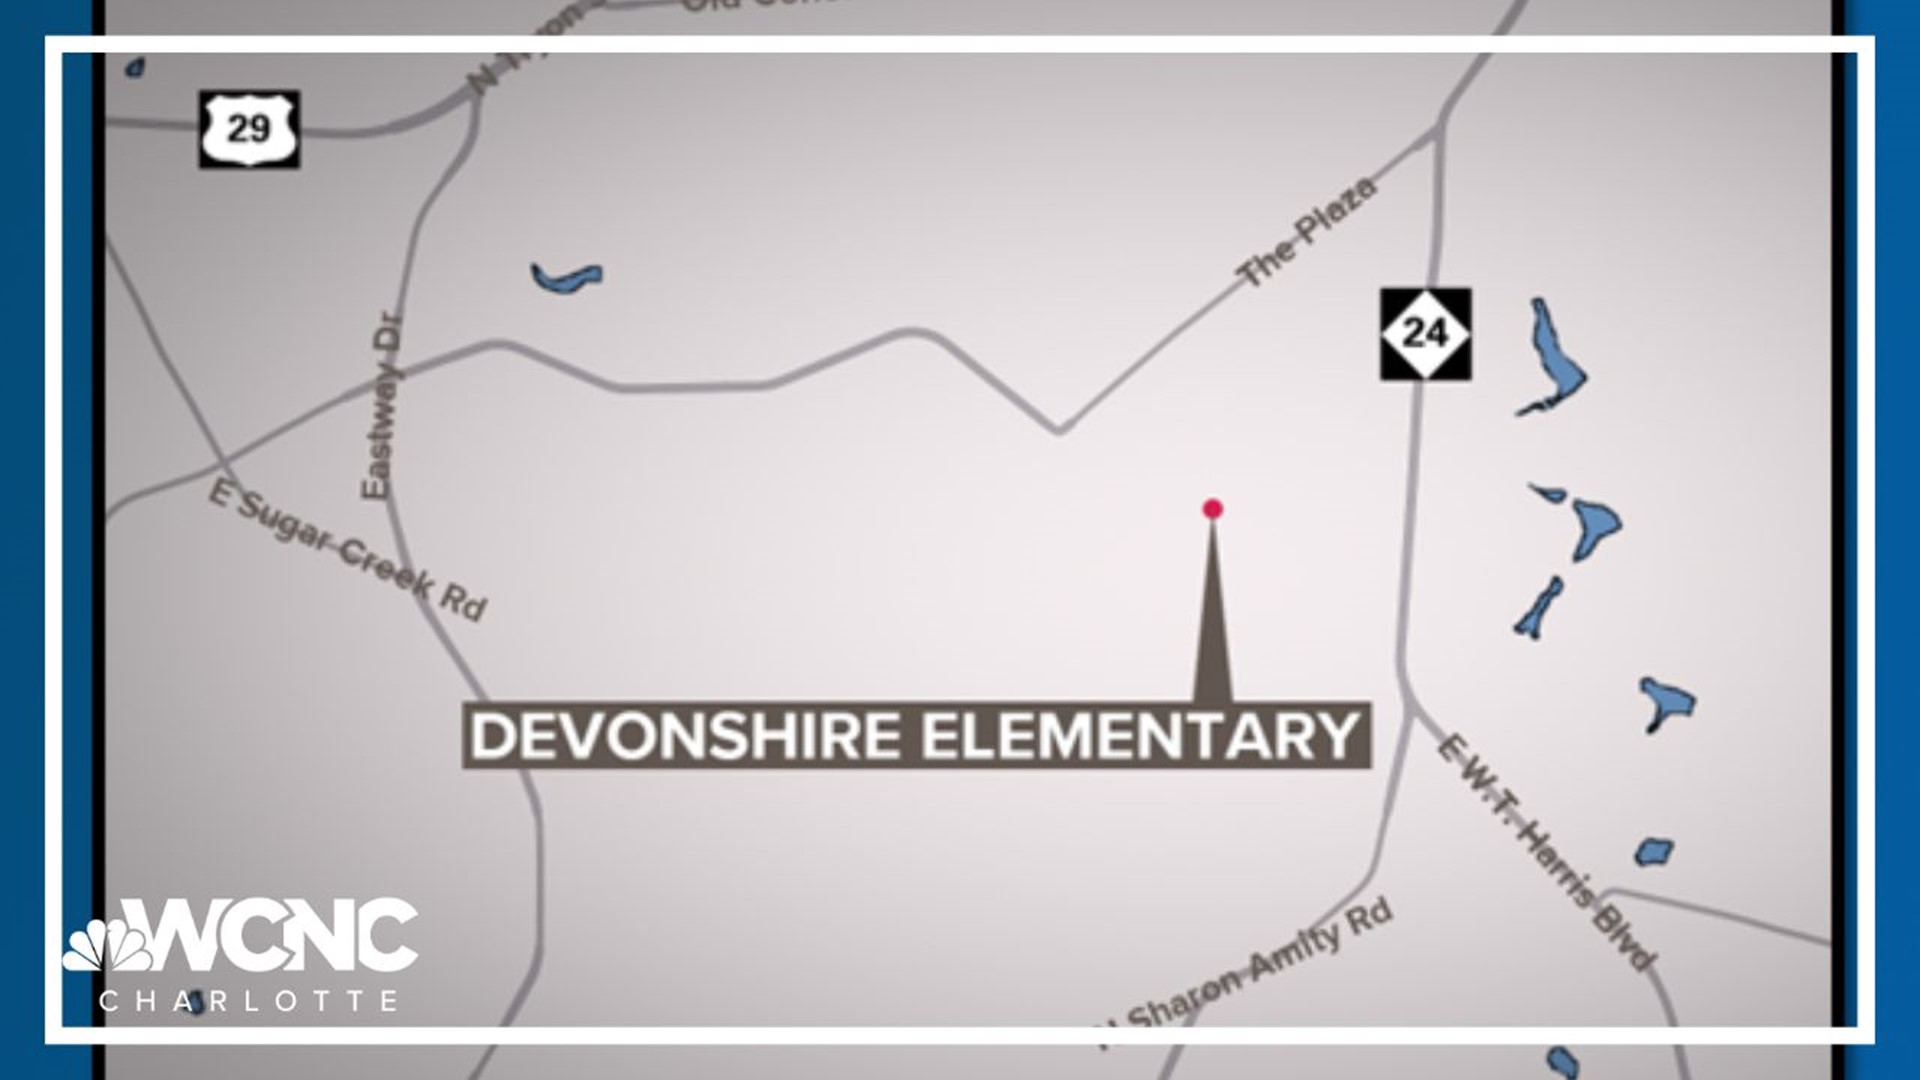 Police are investigating after a student brought an unloaded gun to Devonshire Elementary School in east Charlotte.